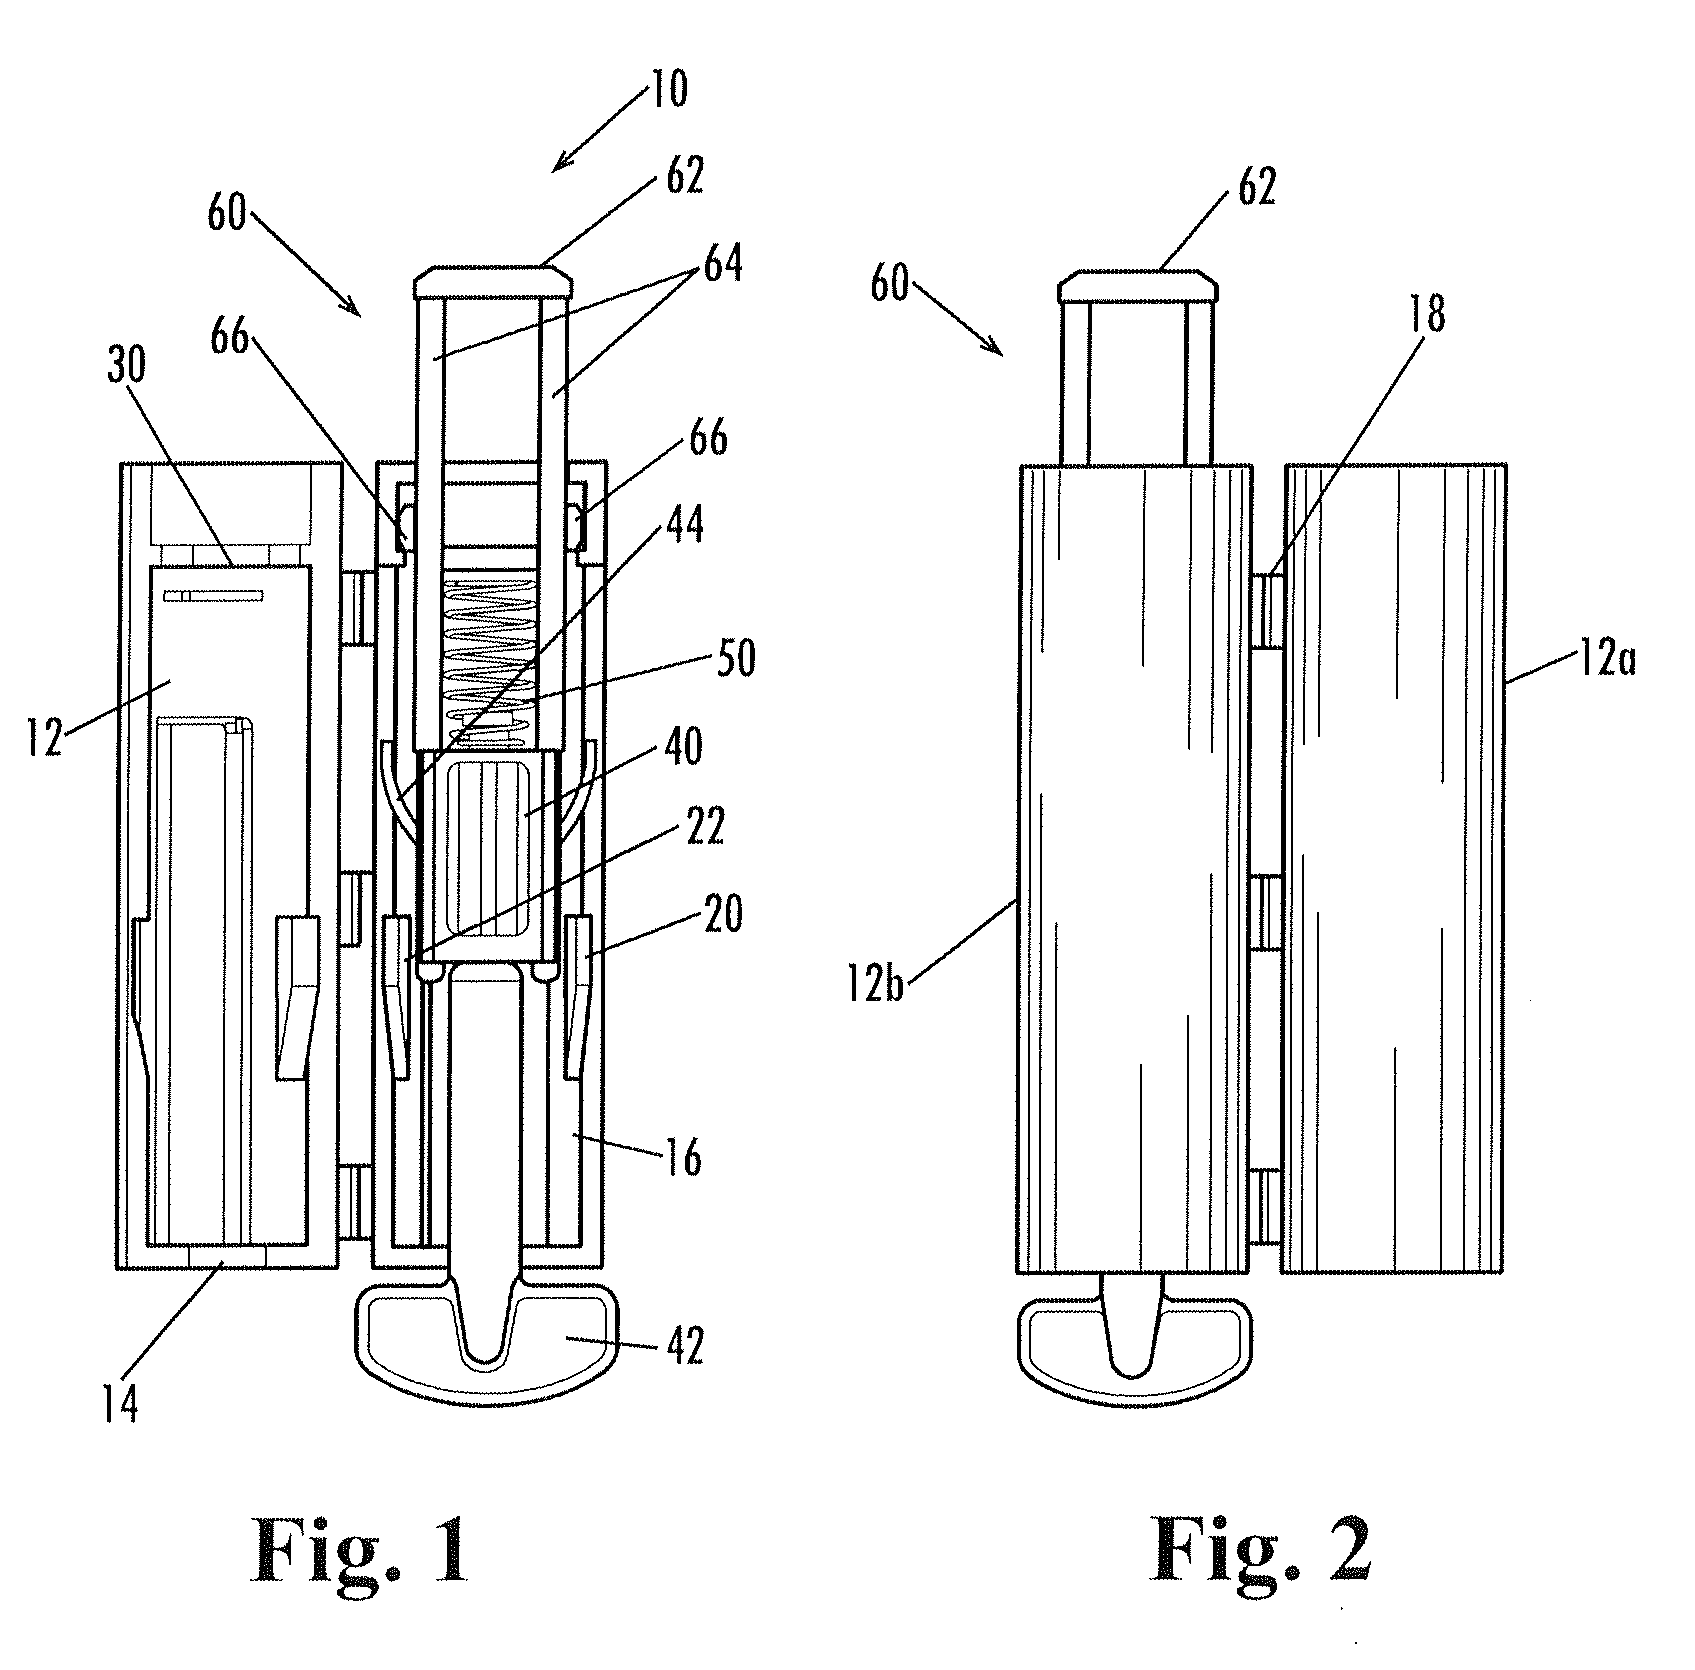 Microsampling device with re-use prevention